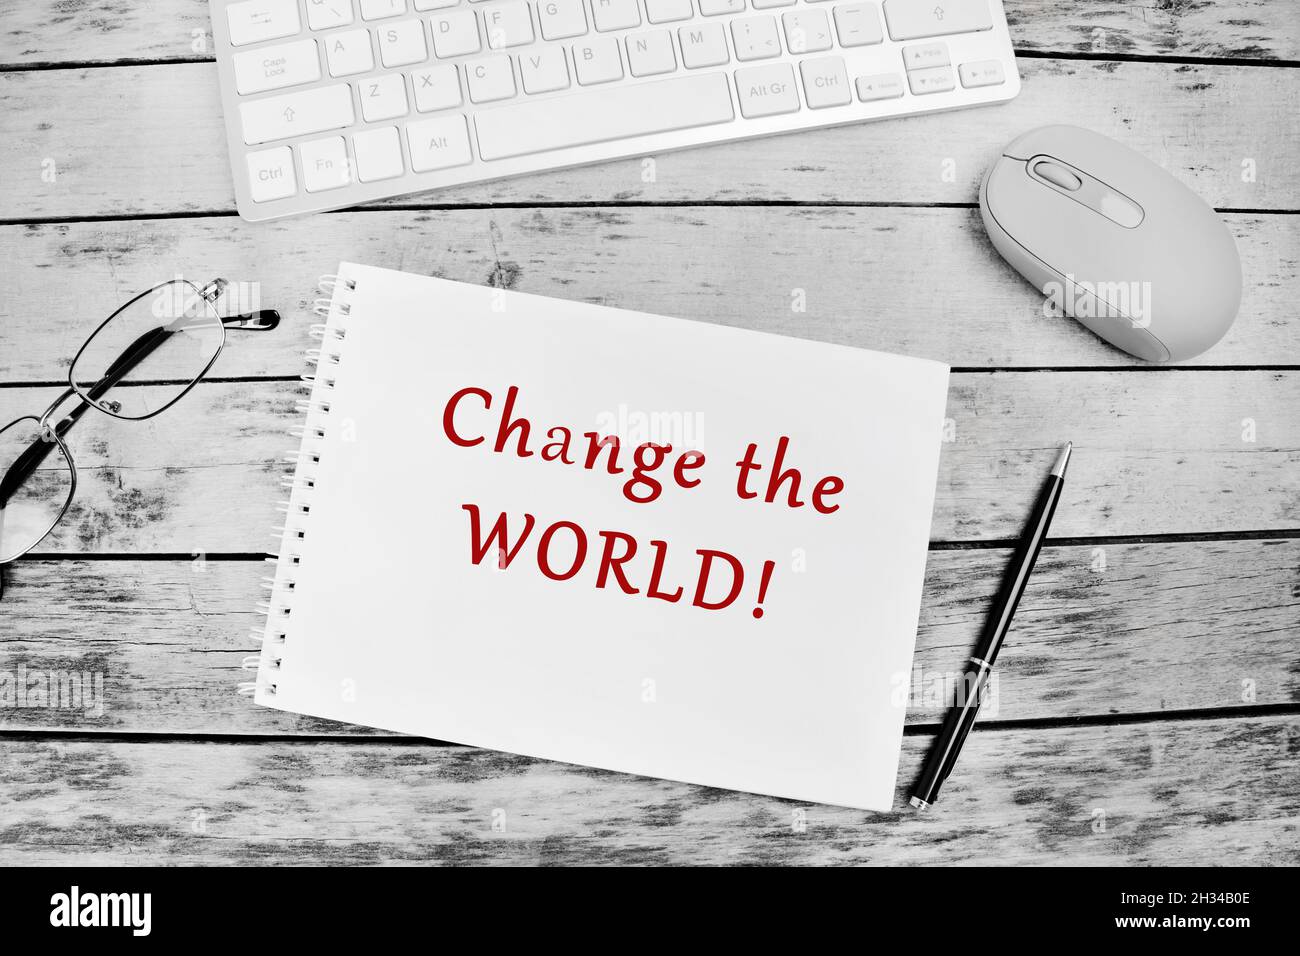 Change the world text on notebook page Stock Photo